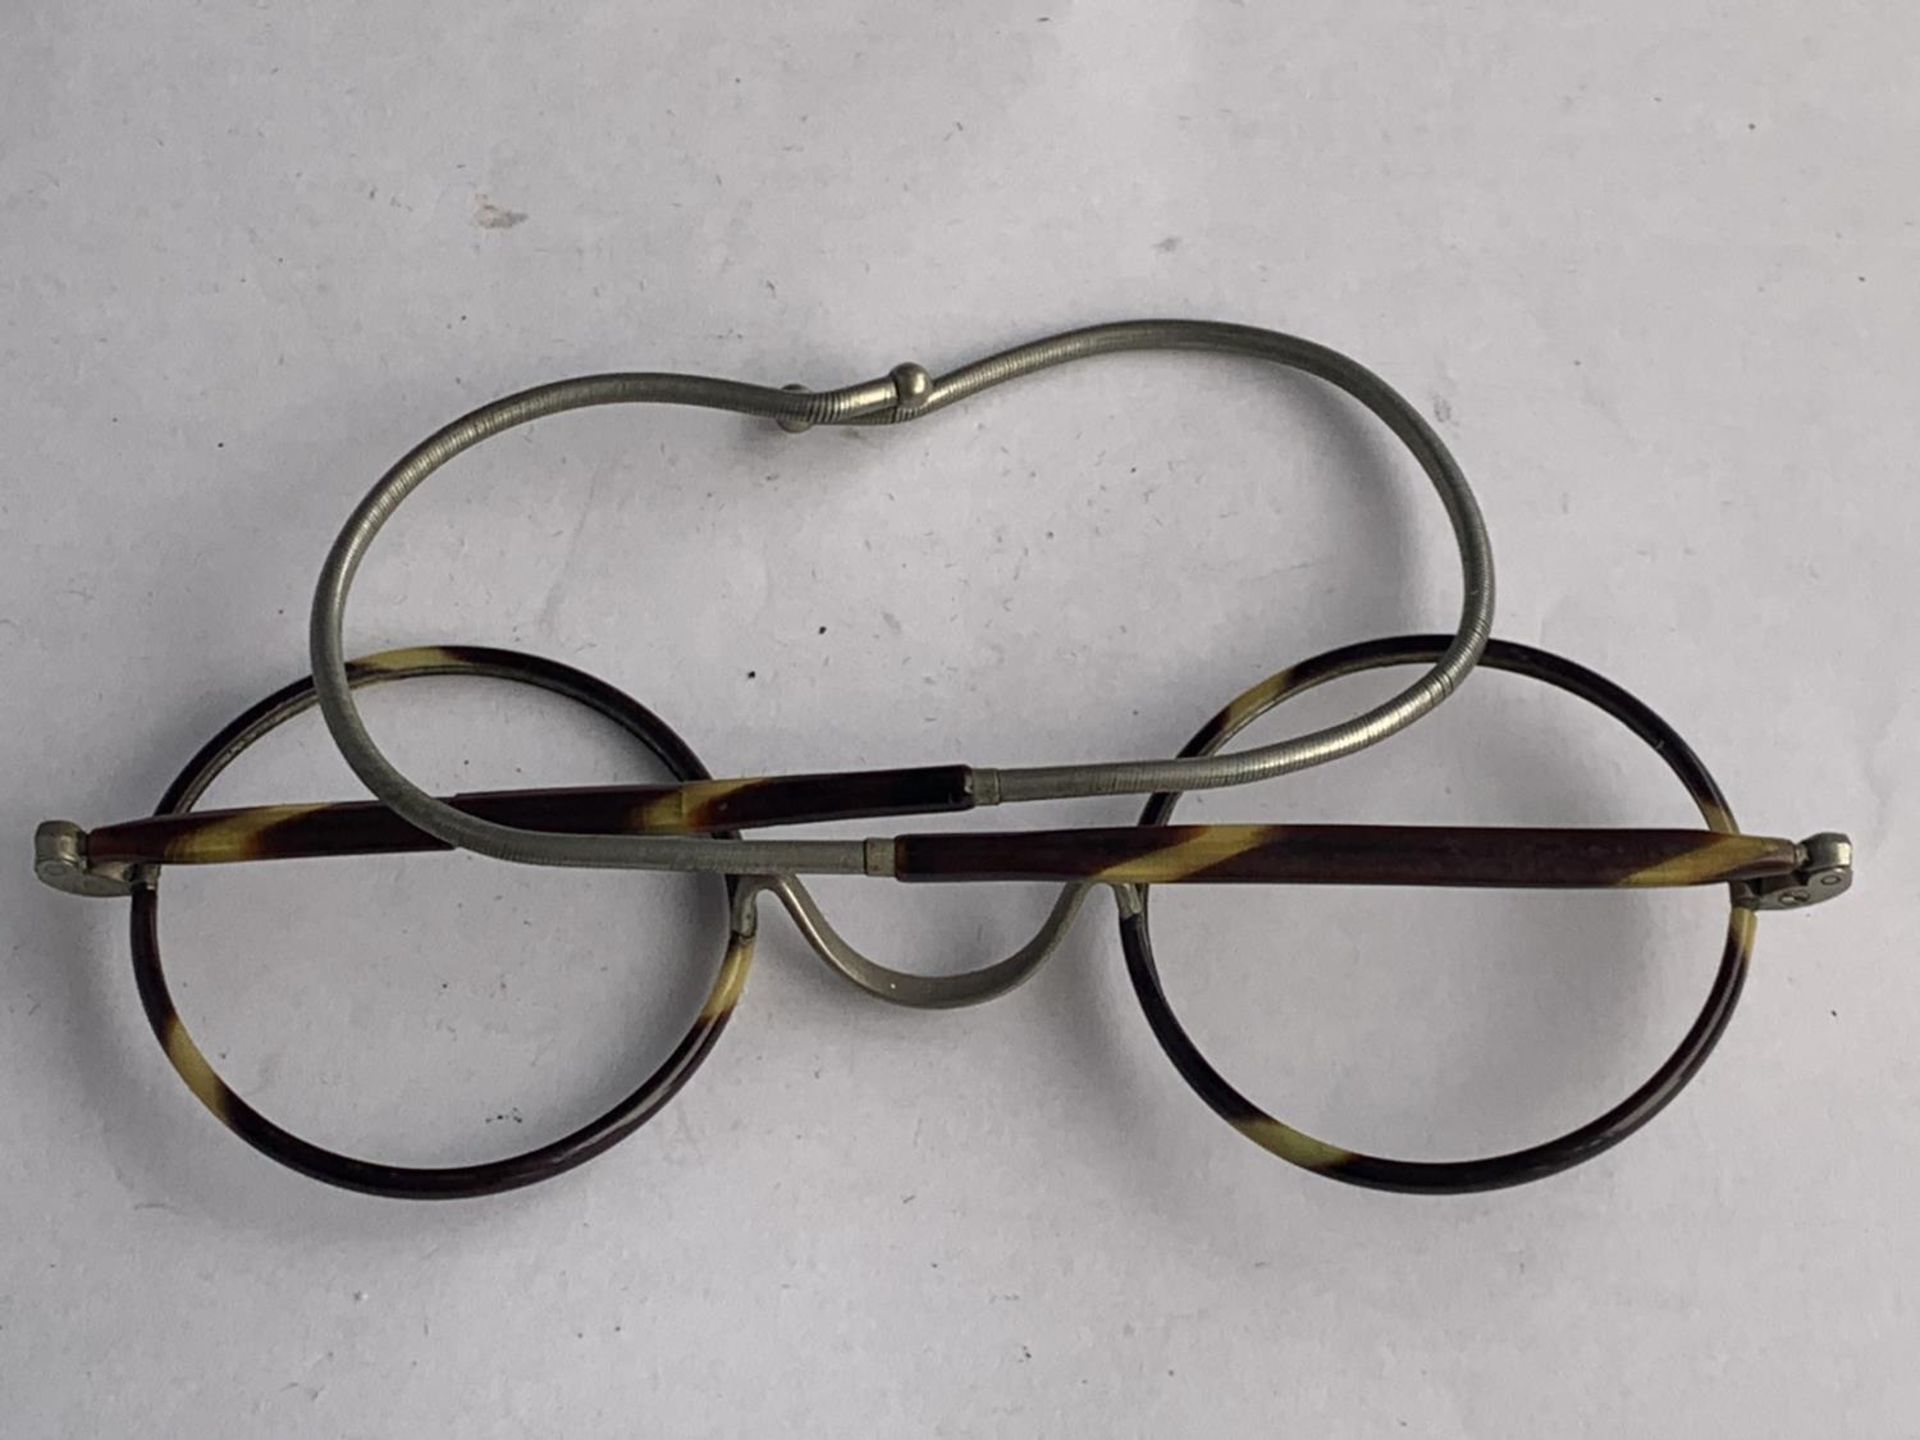 A VINTAGE PAIR OF TORTOISE SHELL SPECTACLES - Image 2 of 2